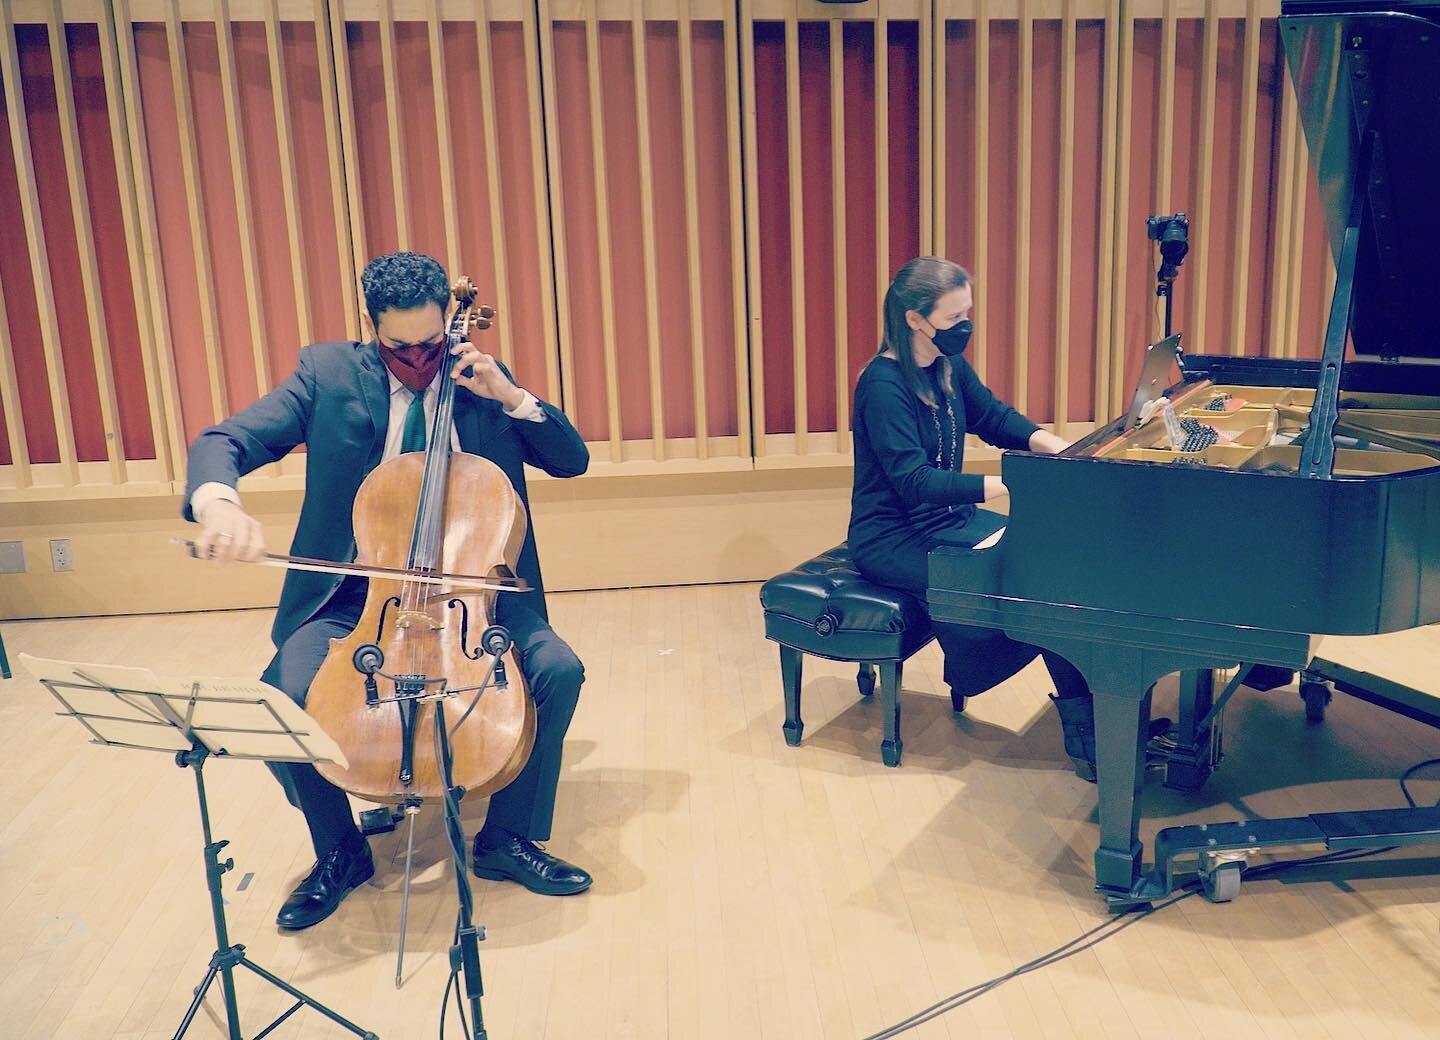 Returning to Downtown Music at Grace to play some Schumann and Brahms with Raman Ramakrishnan - this coming Wednesday, link in bio. #cellopiano #chambermusic #bardfaculty #collaboration @bardcollegeconservatory